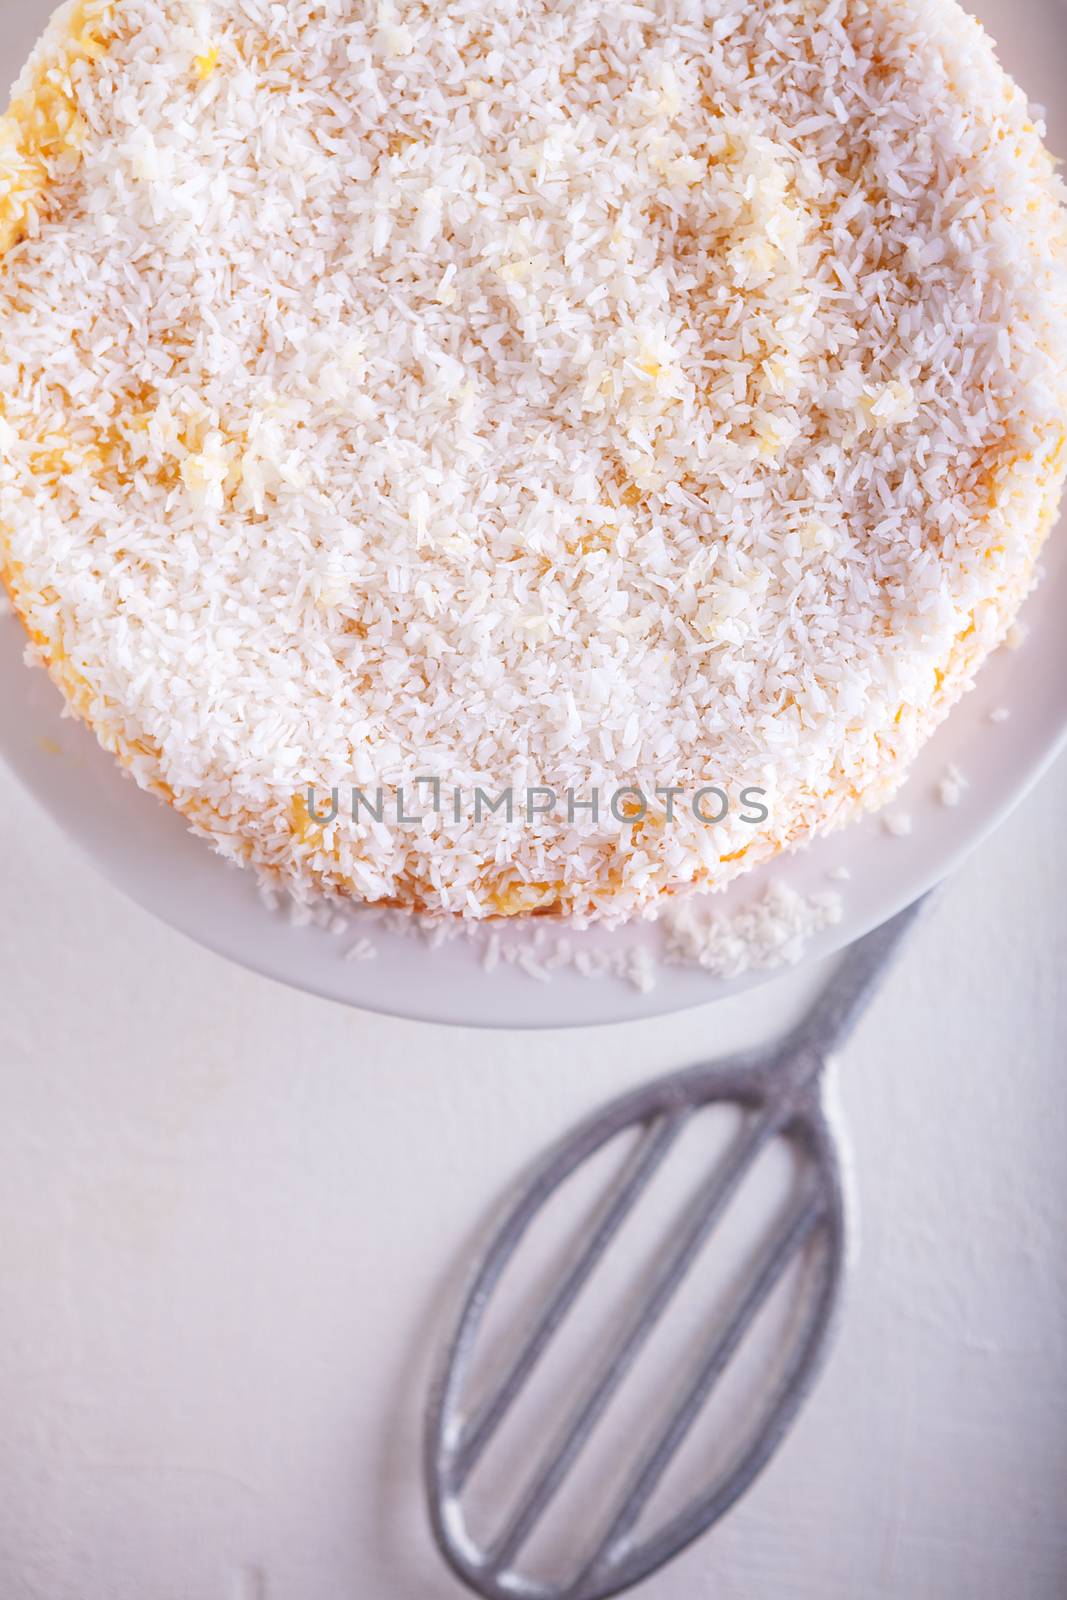 A piece of Homemade coconut cake on a white plate.